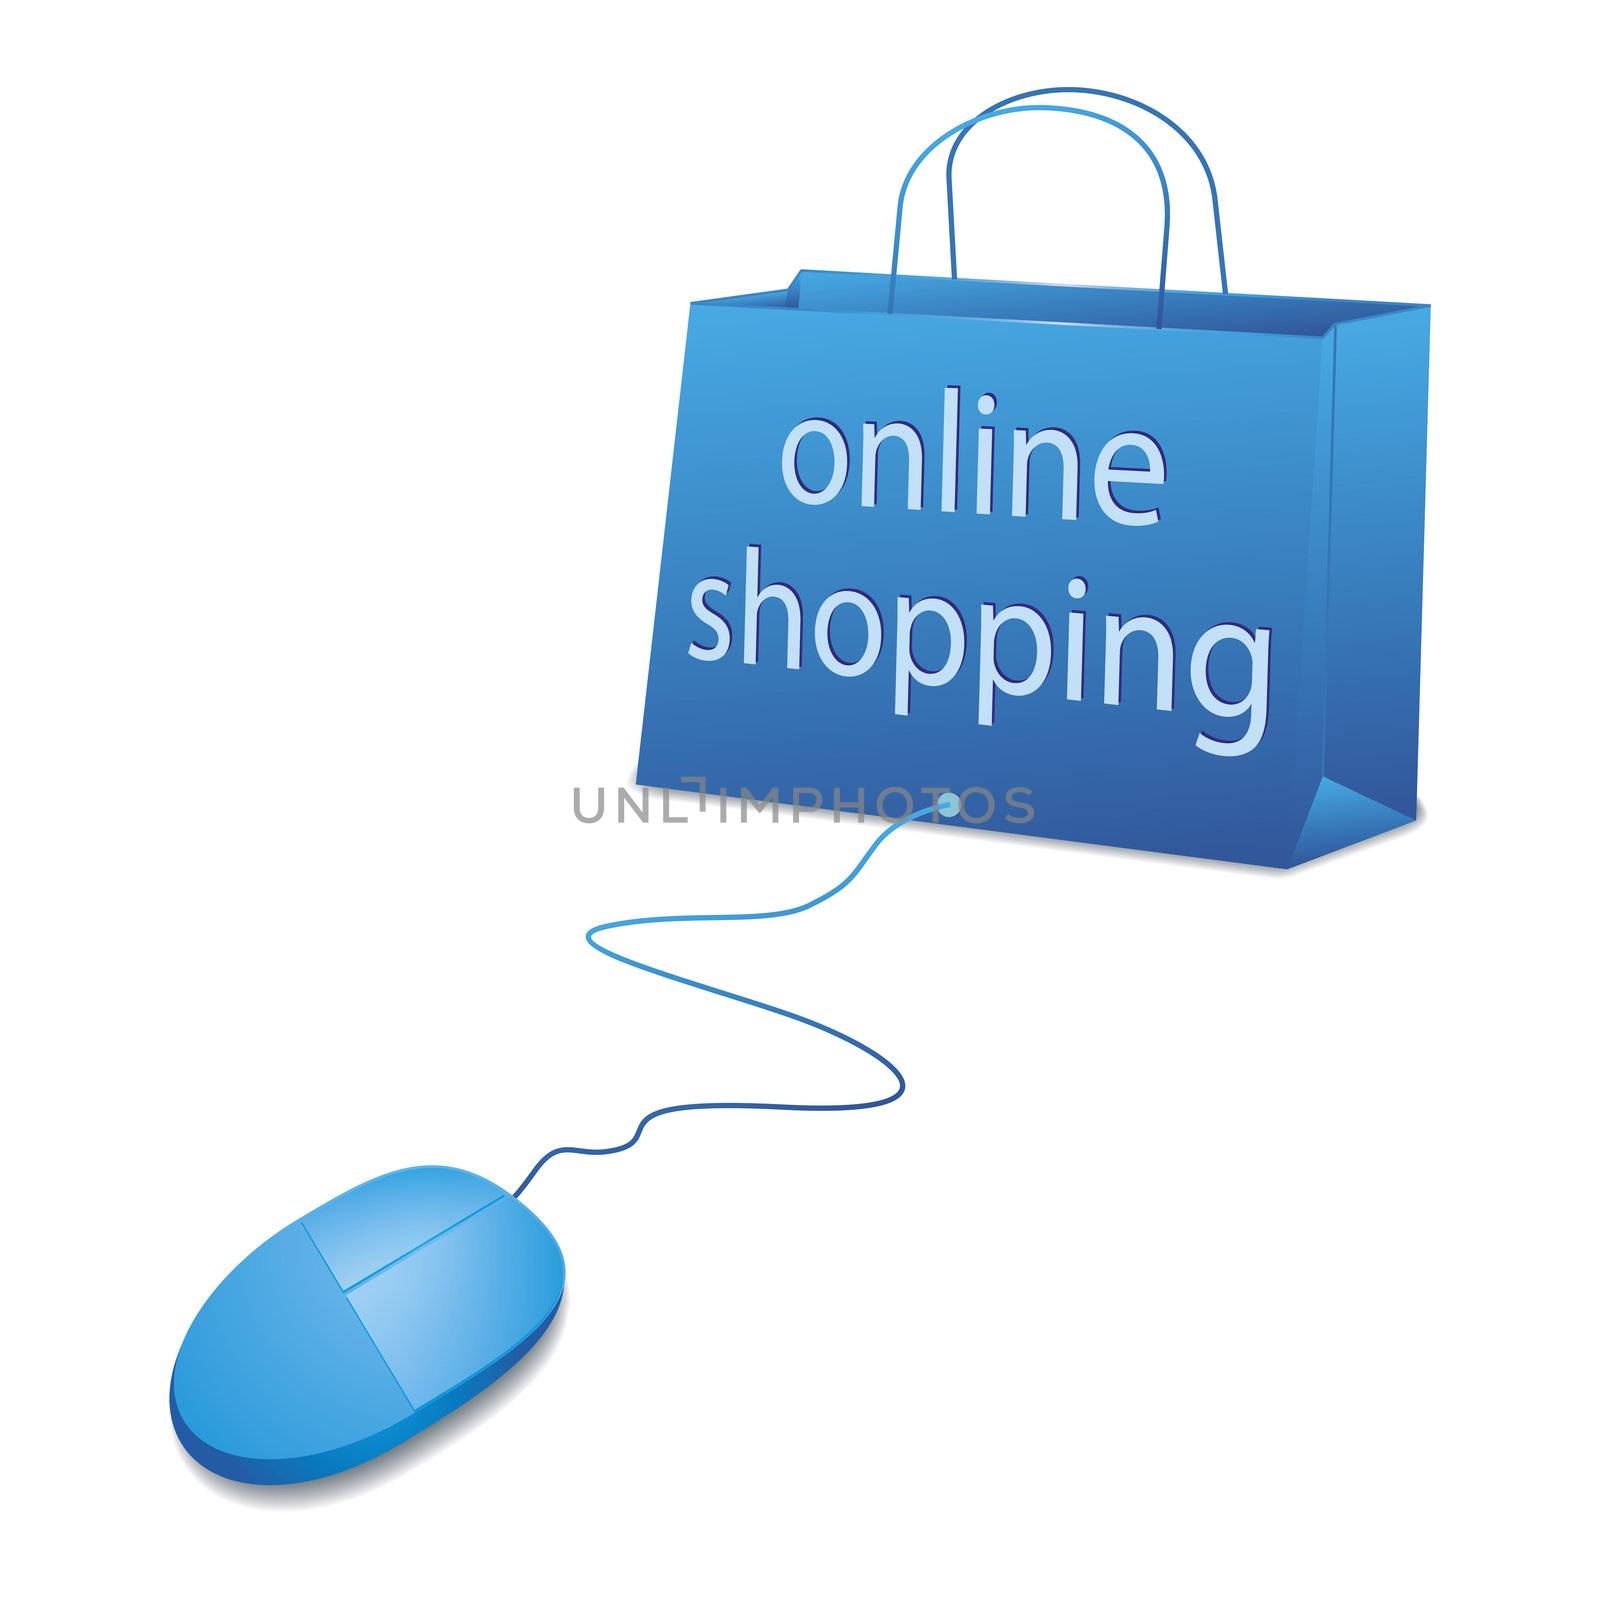 An image of online shopping in blue